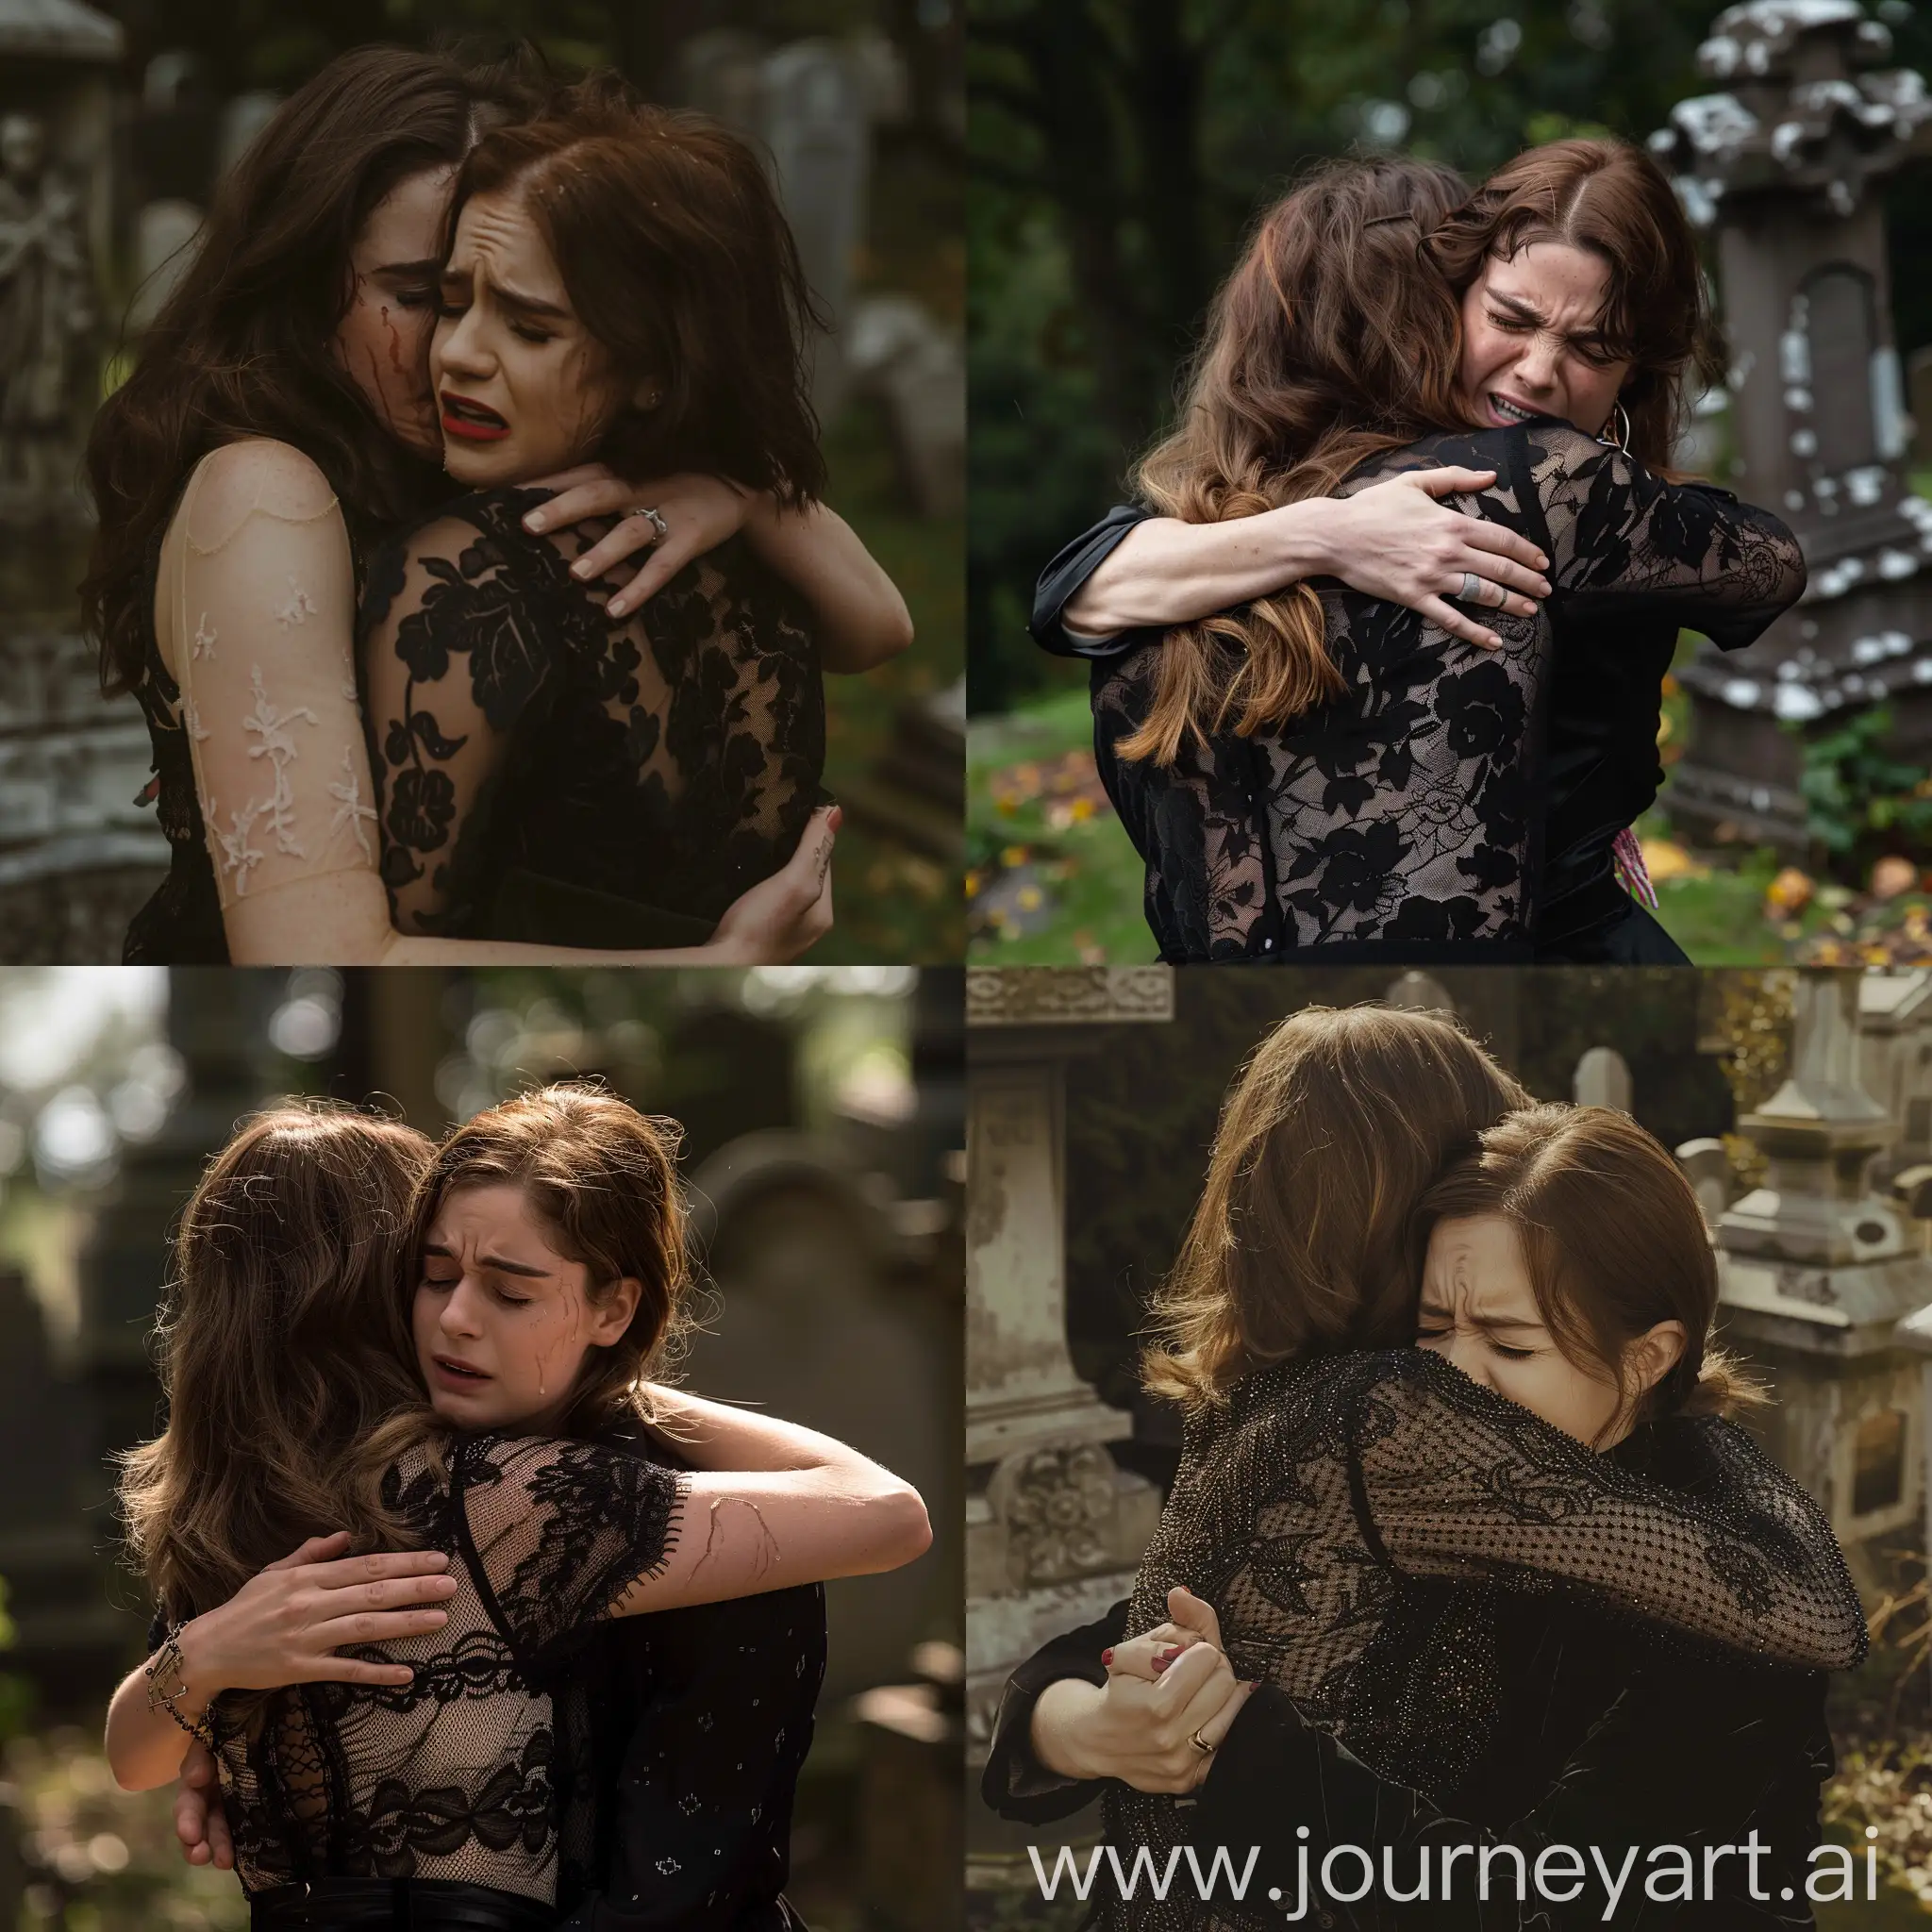 LGBTQ-Lesbians-Couple-Embracing-Emma-Watson-in-Ariana-Grandes-Shirt-at-a-Tearful-Cemetery